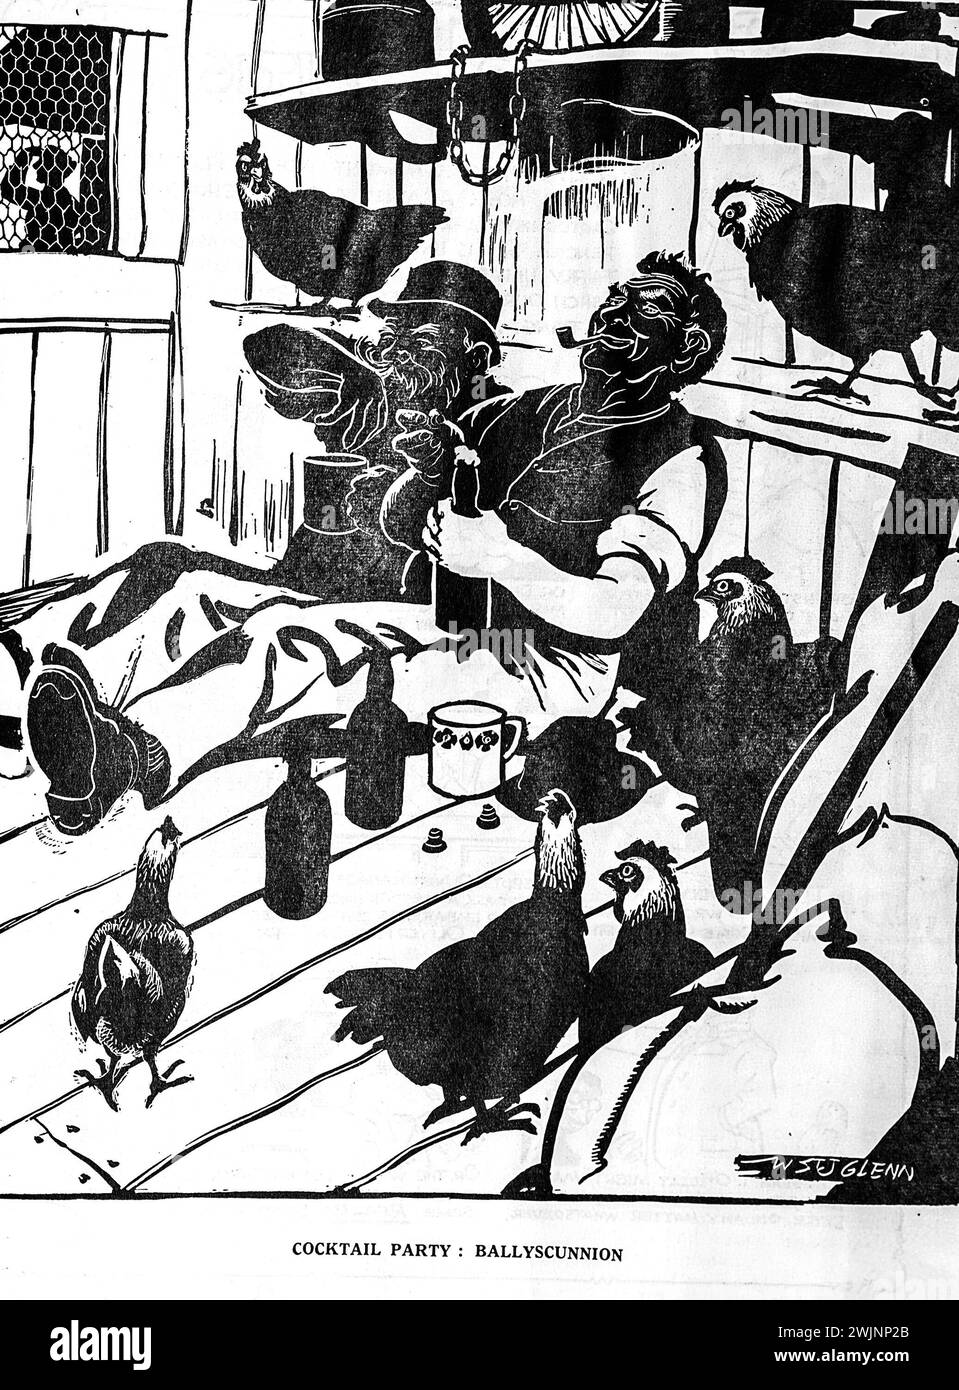 A cartoon from The Dublin Opinion Magazine entitled Cocktail Party: Ballyscunnion, showing two men in a hen coop enjoying bottles of stout while hens wander around them. Ballyscunnion was an fictional village in Ireland and the goings on there was a regular feature of the magazine. Stock Photo